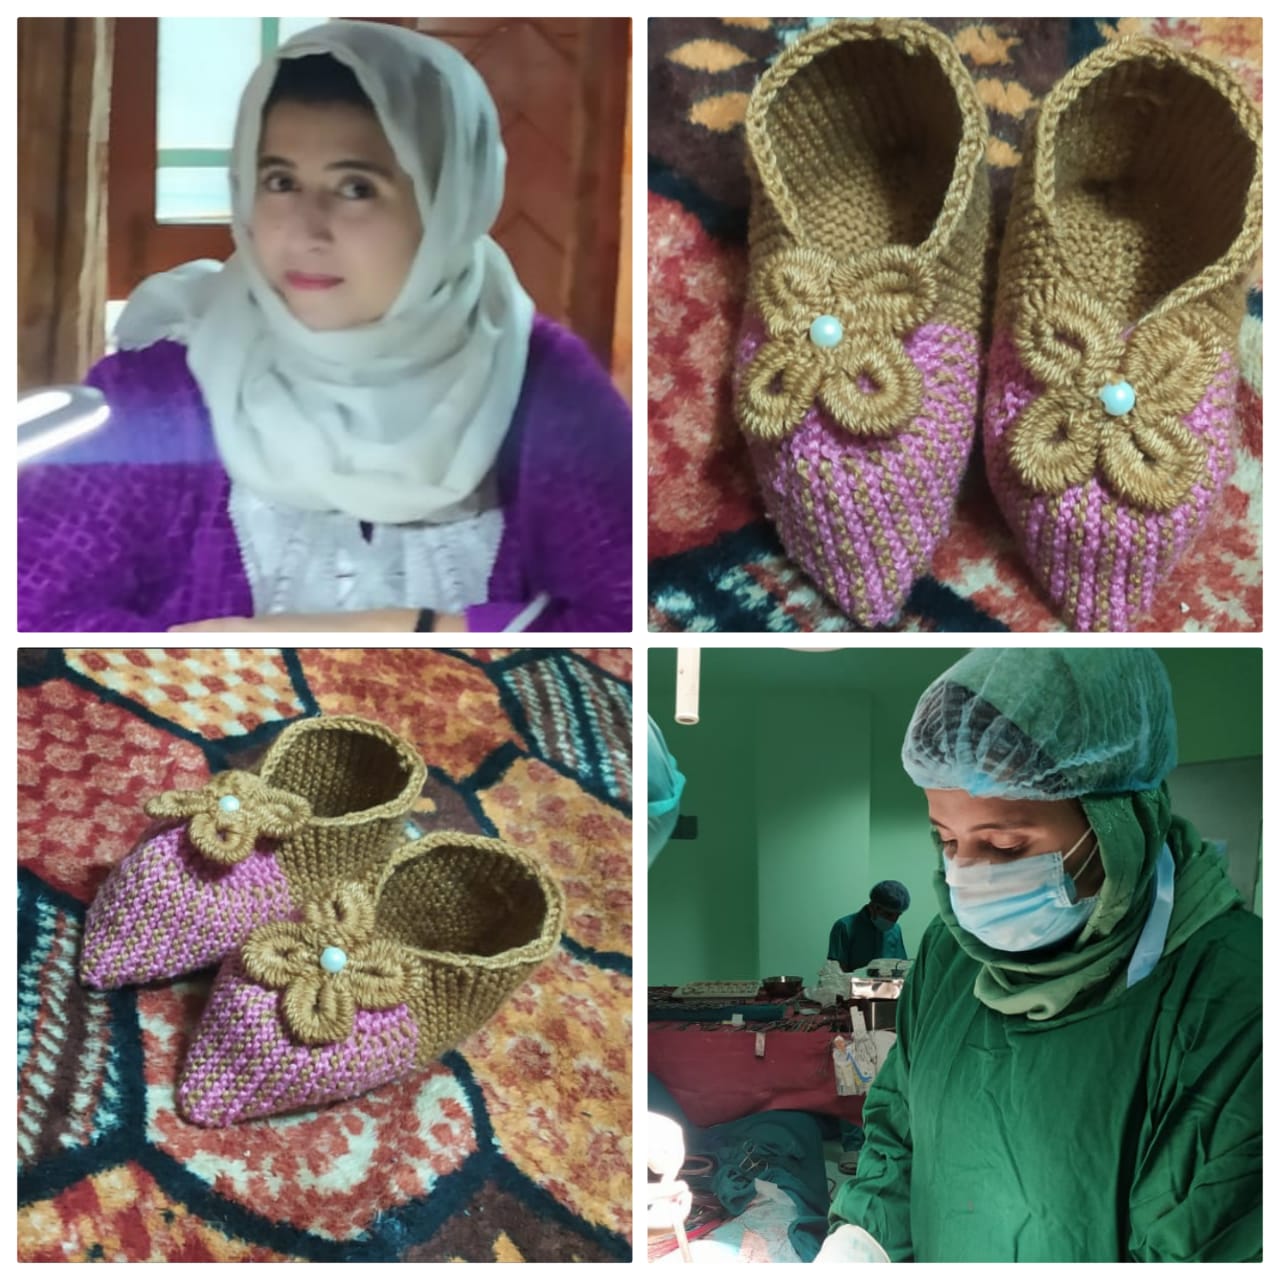 Magical hands of 25-year-old Rabia: from training in surgical equipment to excelling in craft